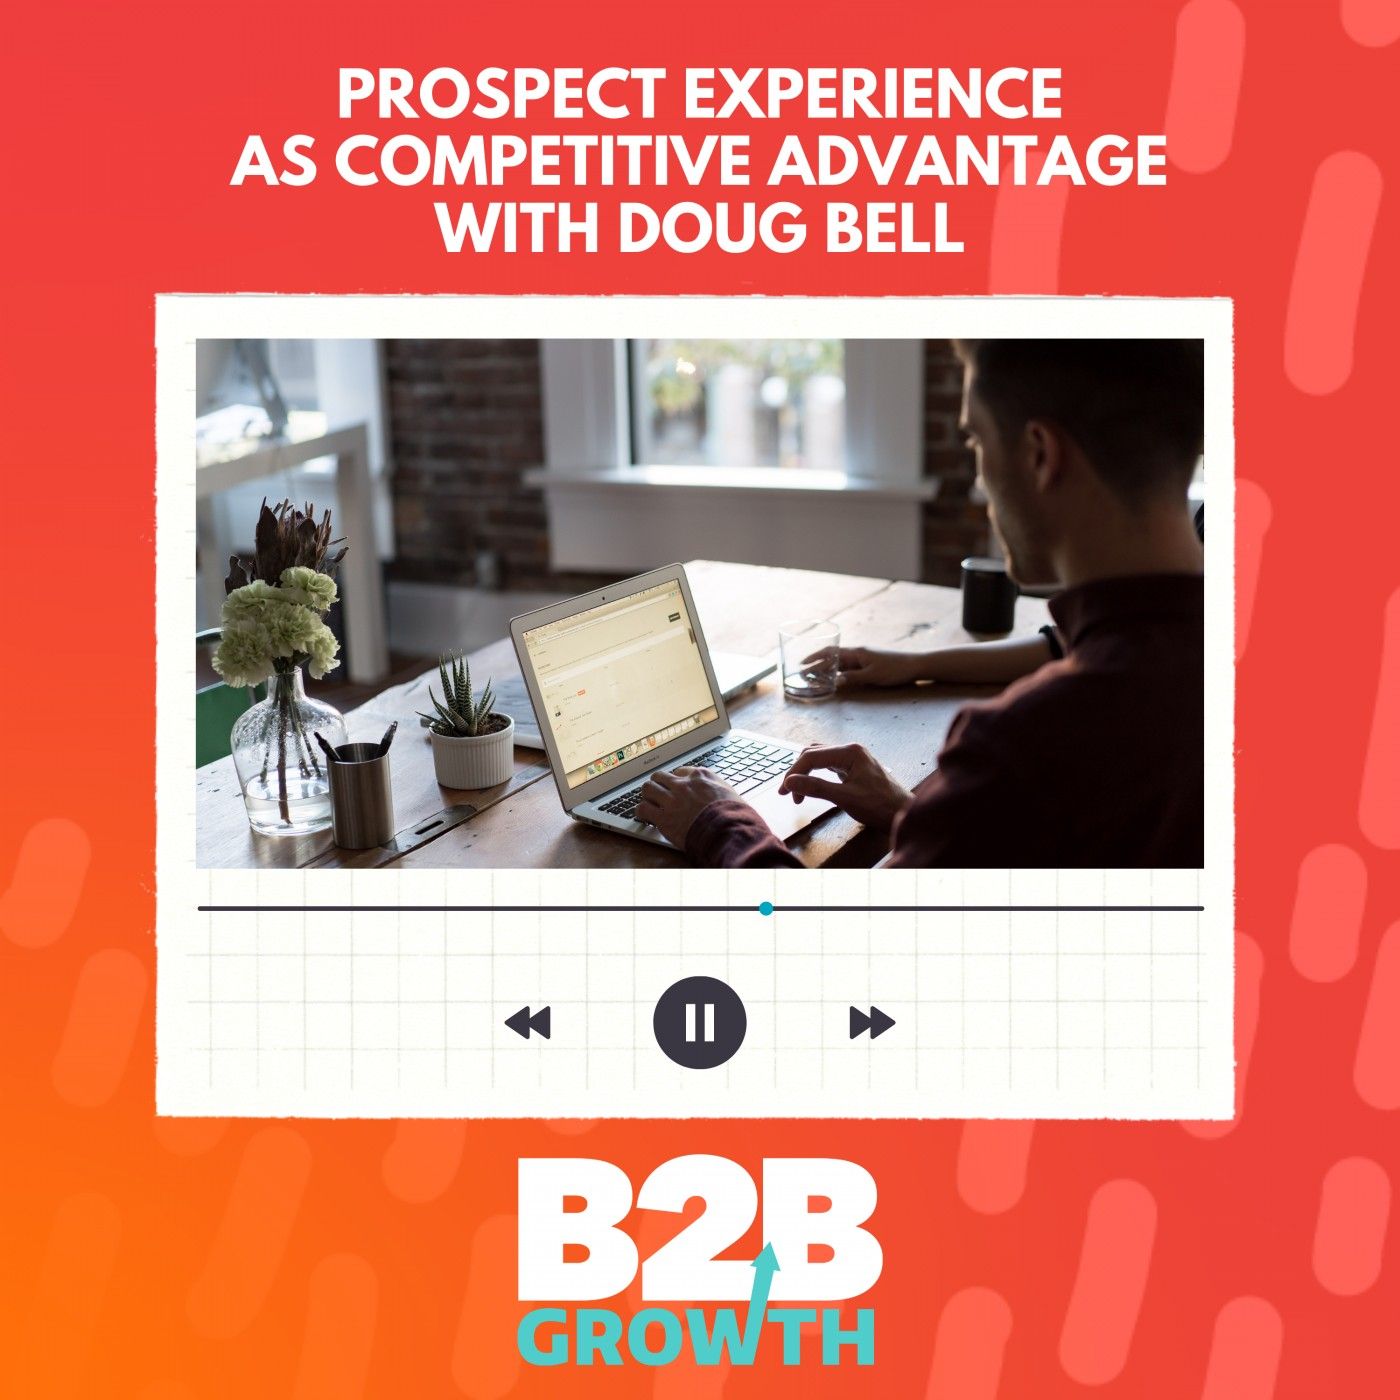 Prospect Experience as Competitive Advantage with Doug Bell